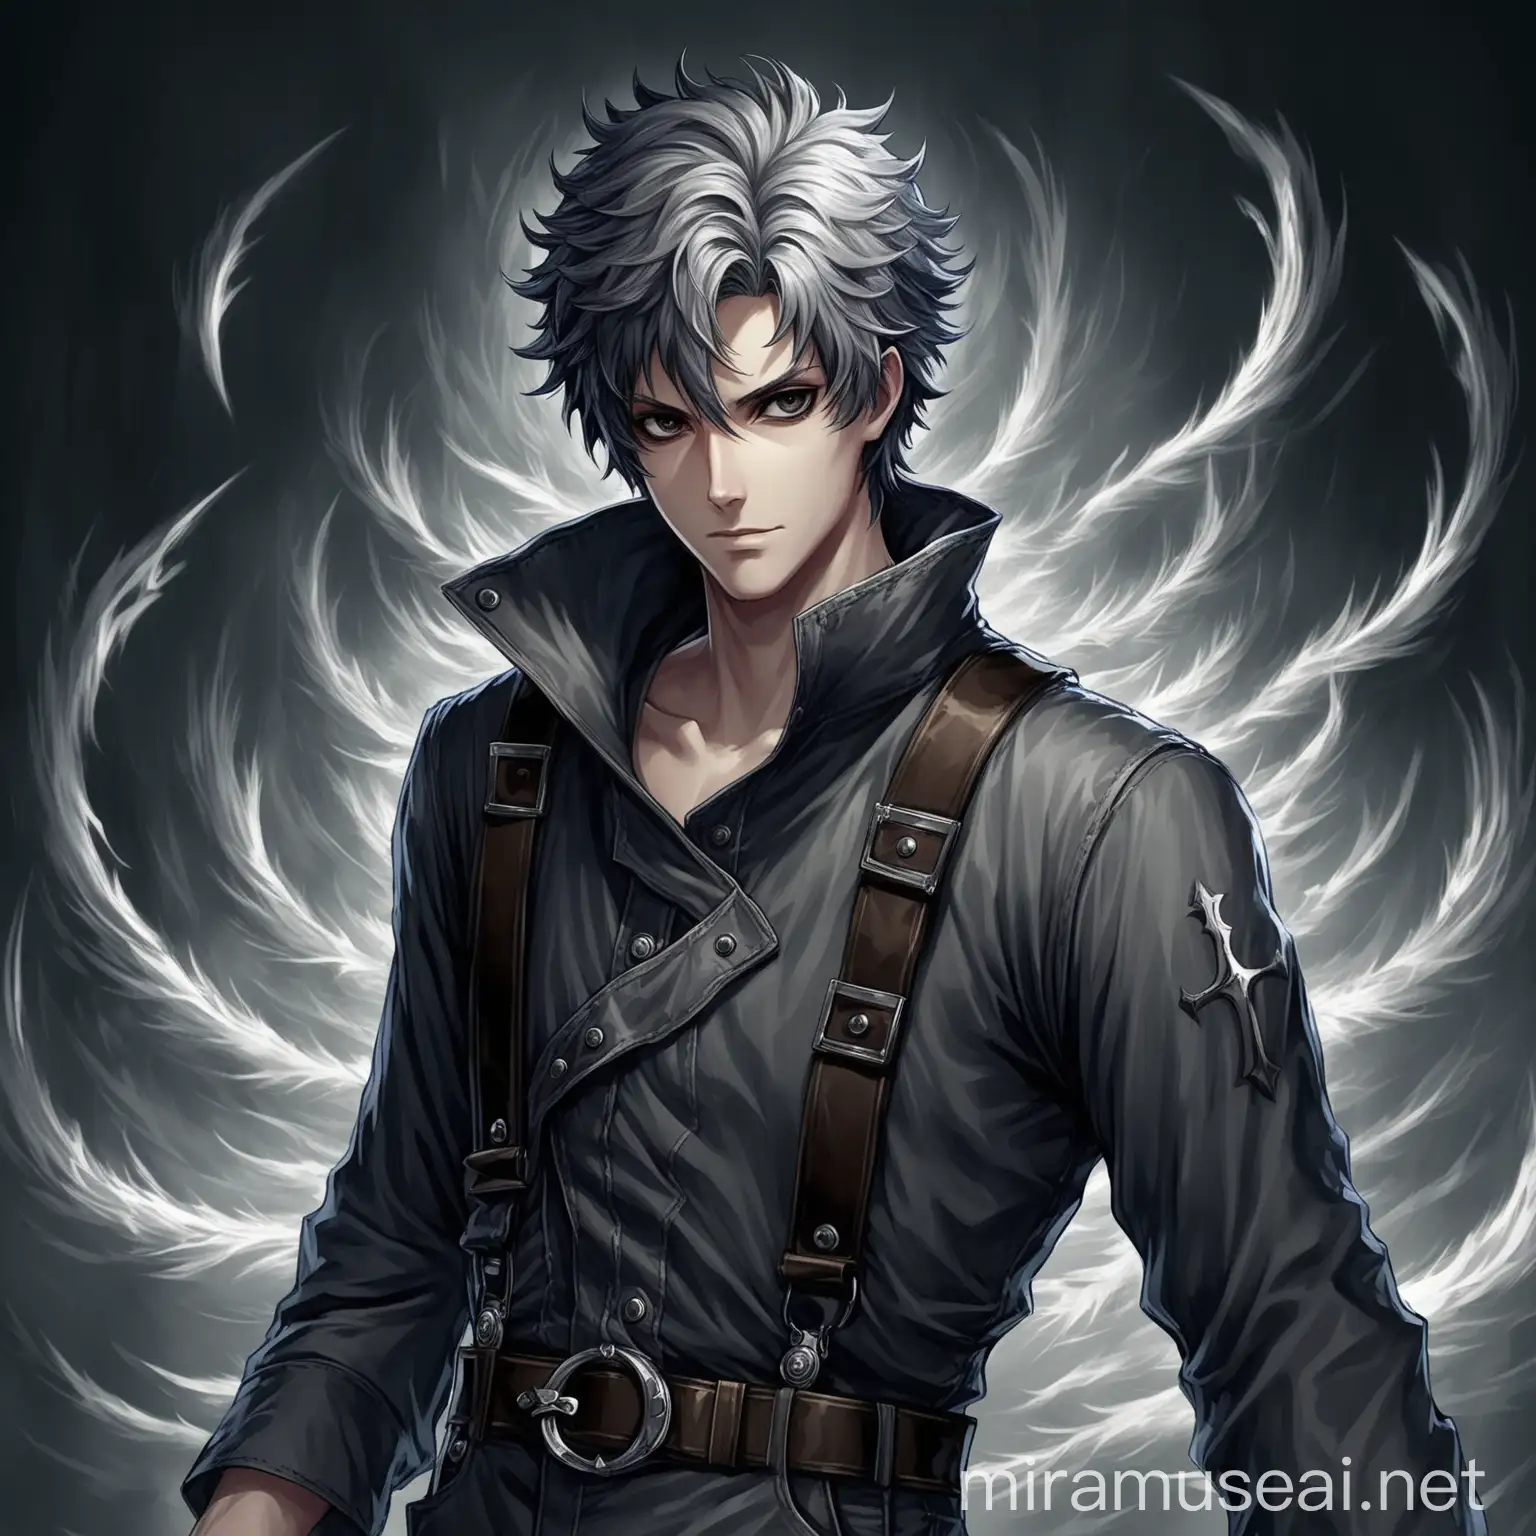 Overall,he is a charming Assassin character who has black eyes and gray comma hair, exuding an aura of mystery, danger and undeniable skill. His striking appearance, sharp wit, and unwavering loyalty make him a compelling figure who is sure to catch the eye of any Midjourney creation.